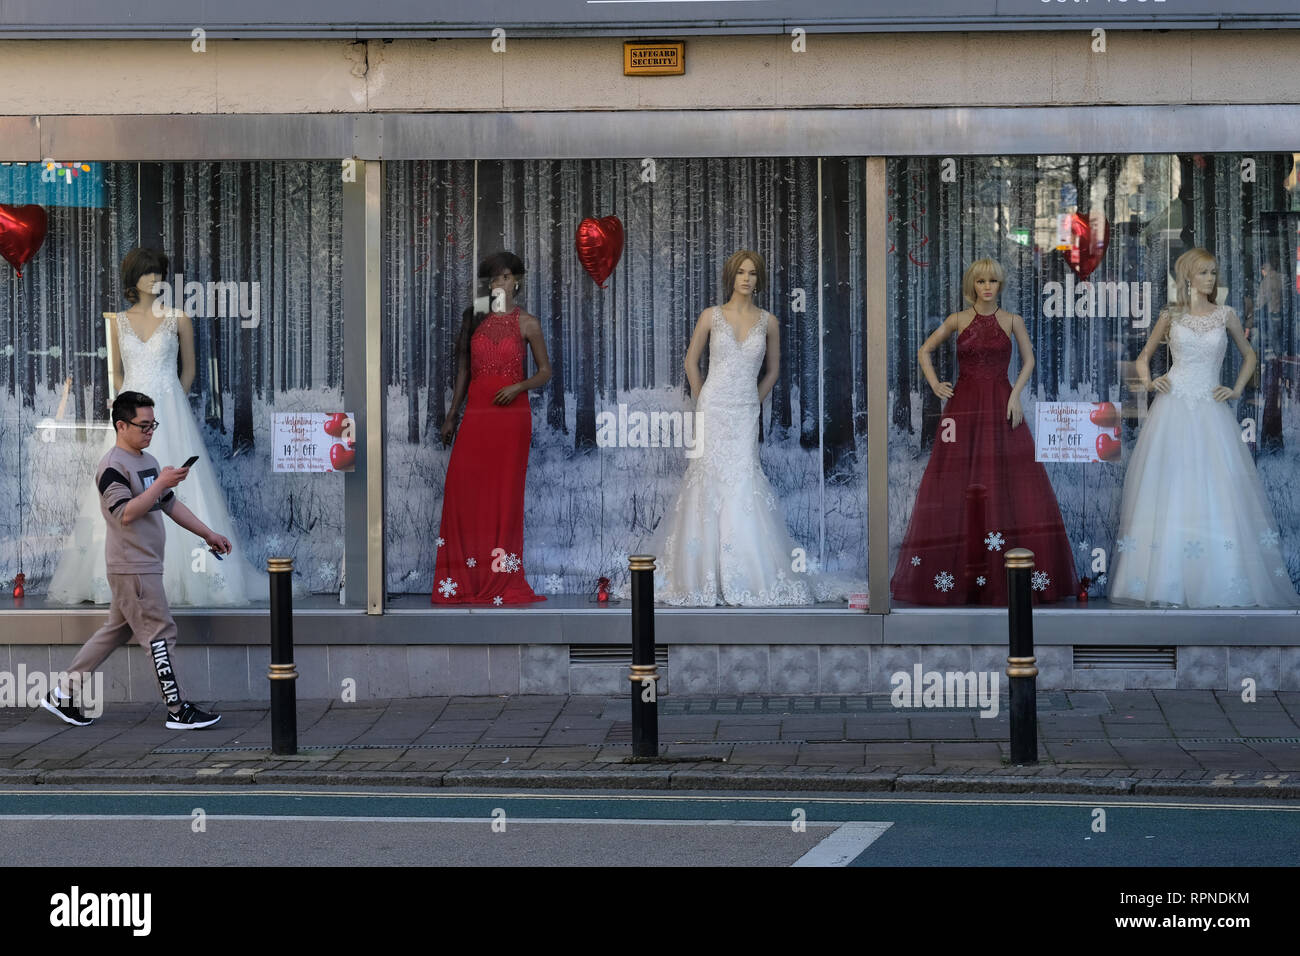 A man walks past a wedding dress shop in Exeter, UK. Stock Photo